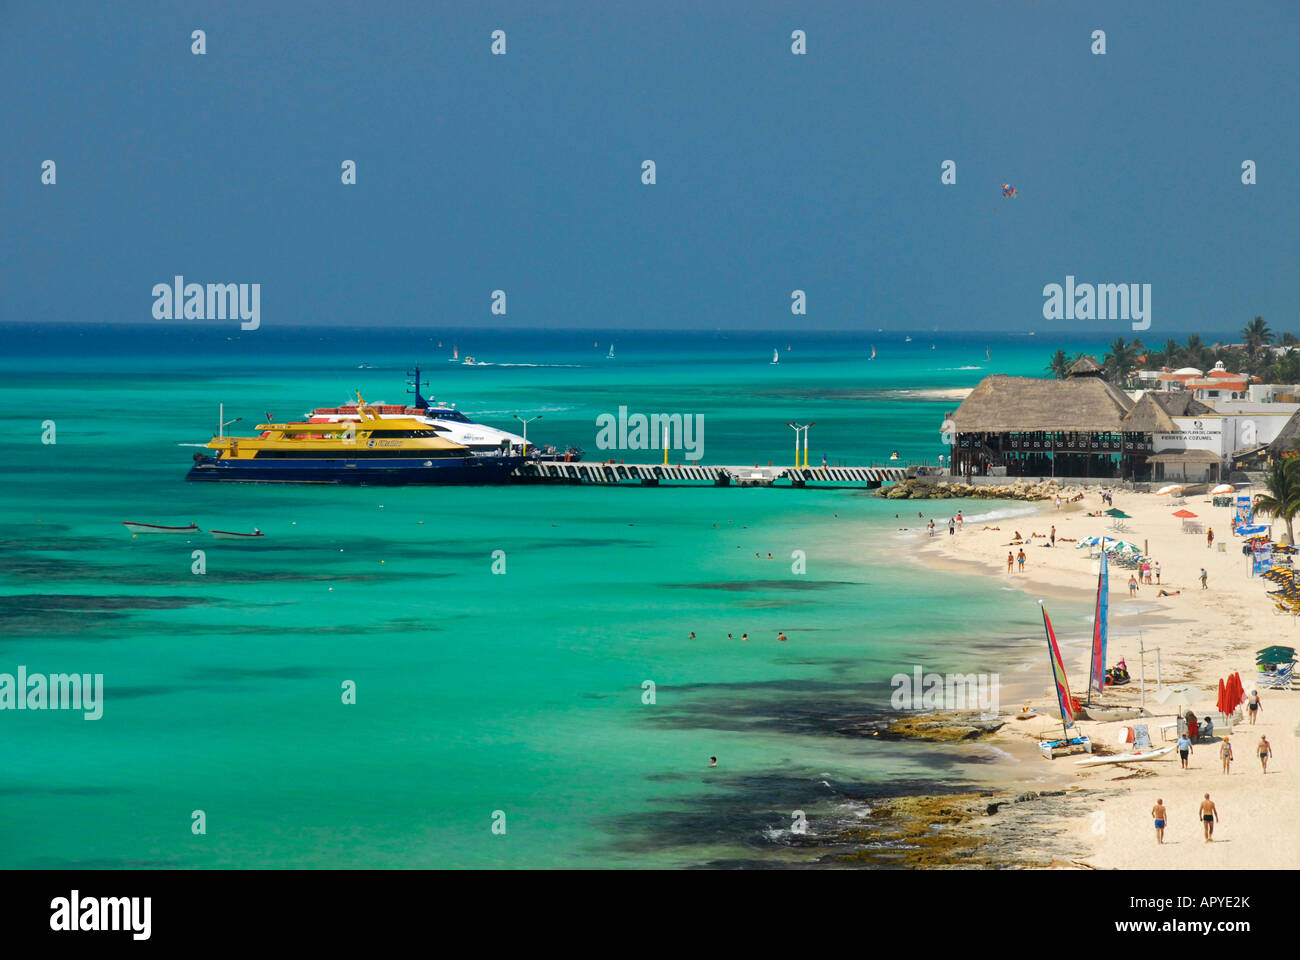 Playa del Carmen beach with Cozumel ferry pier in distance, Playa del Carmen,  Quinatana Roo state, Mexico, North America Stock Photo - Alamy